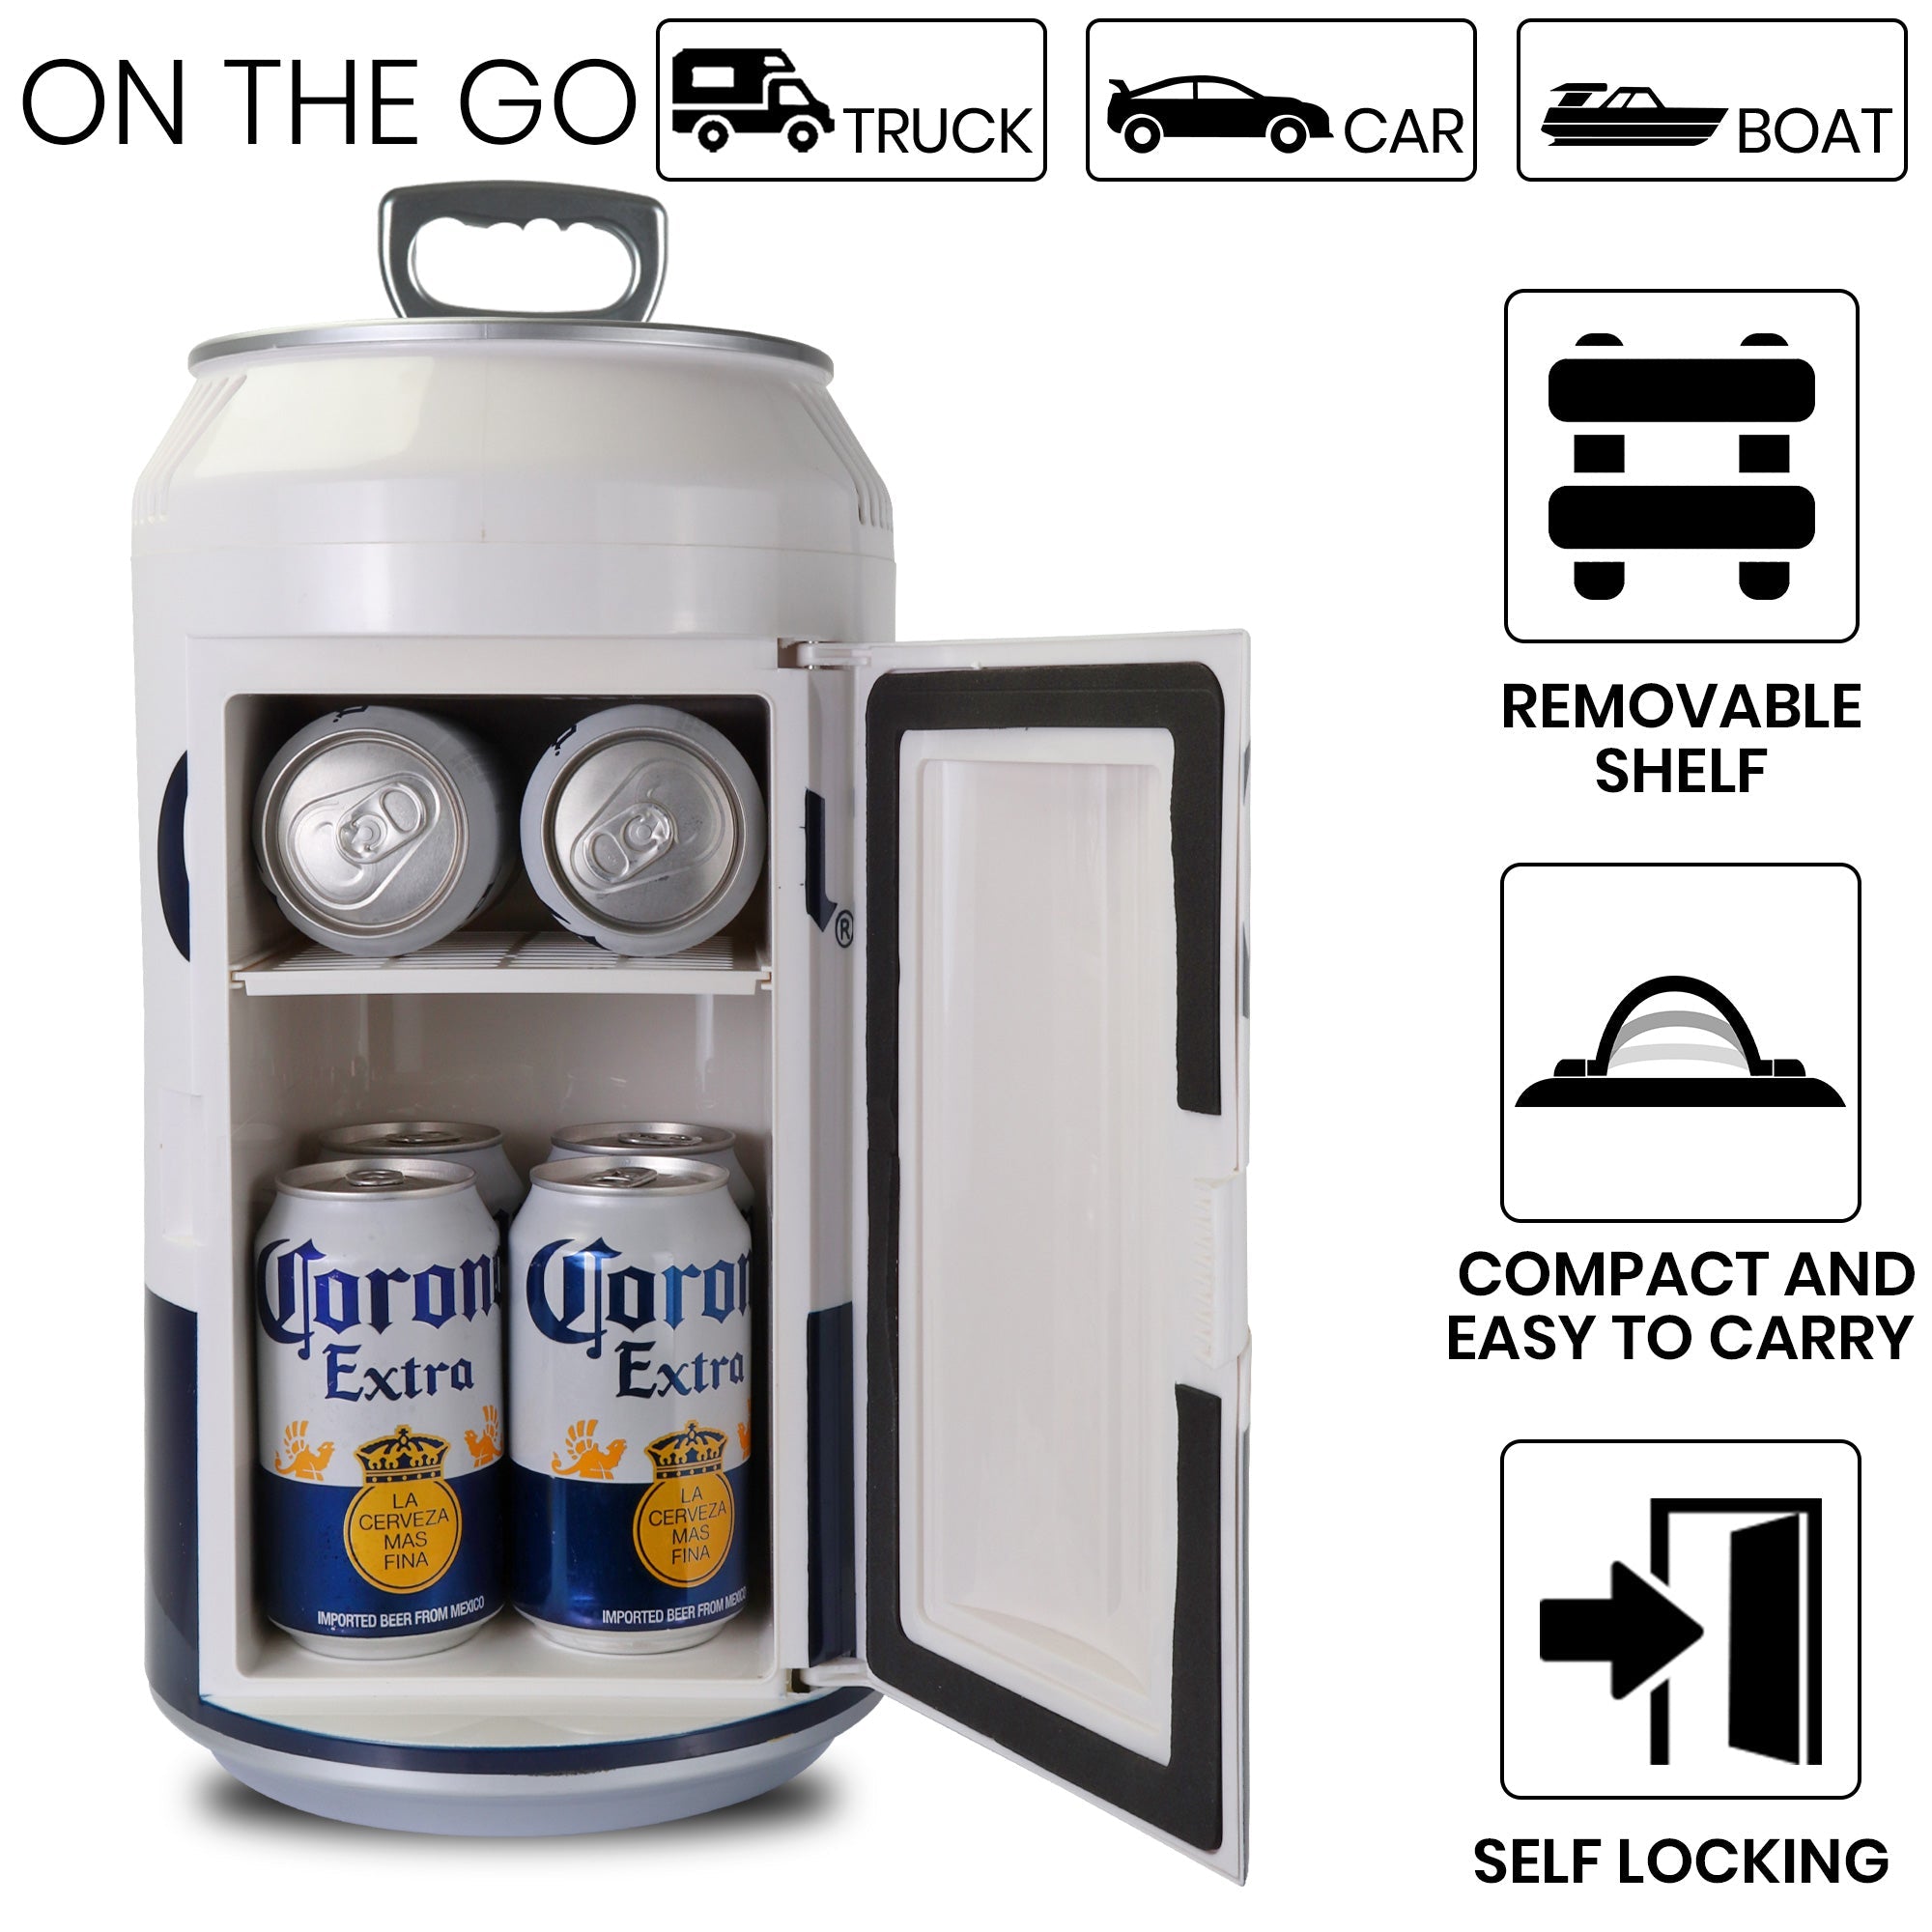 Closeup image of open cooler with 6 cans of Corona beer inside and pull-tab carry handle flipped up. Above are icons and text describing: On the go - truck, car, boat. To the right are icons and text describing: Removable shelf; compact and easy to carry; self-locking